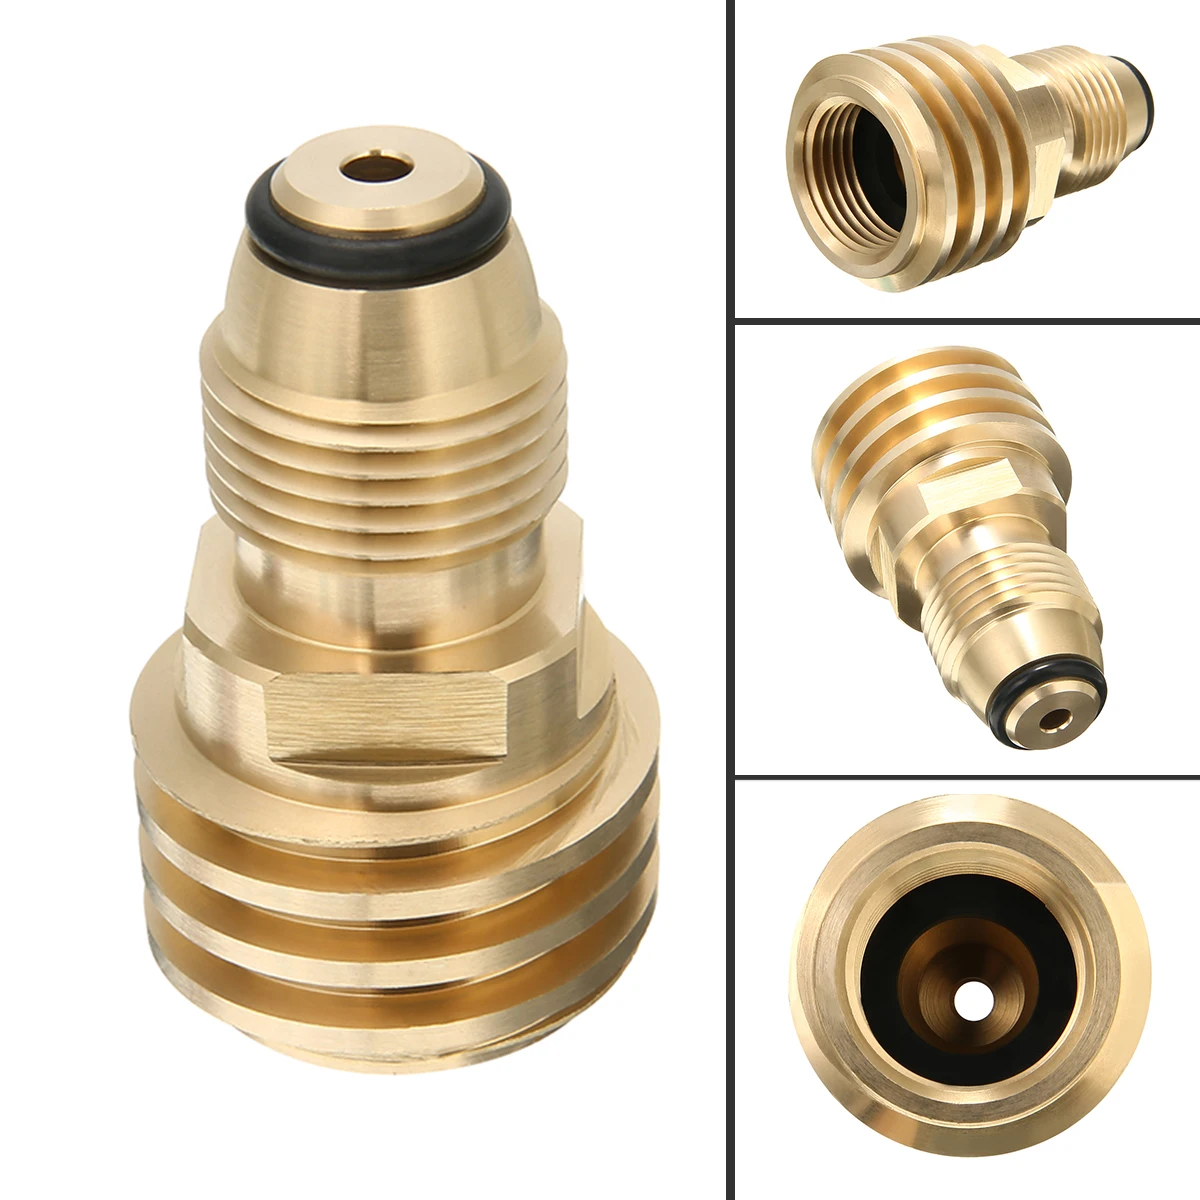 1Pc Converts Propane Tank Replaceable Service Valve Outlet Brass Outdoor Garden Watering Adapter Hiking Gas Burner Part | Дом и сад